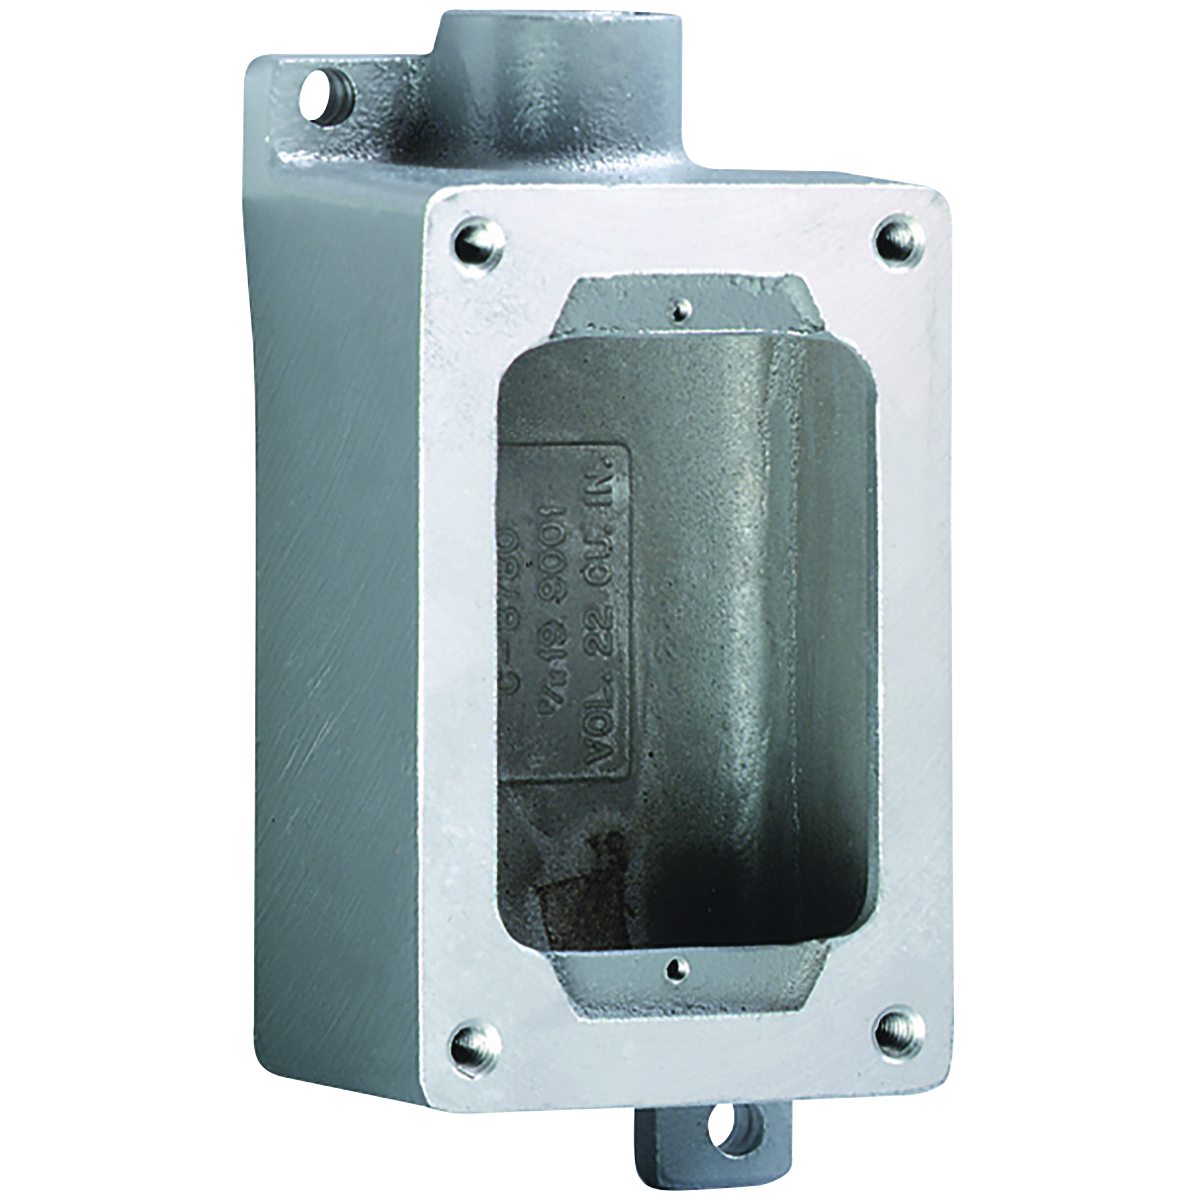 SWB SERIES - ALUMINUM DEAD-END SINGLE-GANG DEVICE BODY FOR USE WITHXCS/XS/XT COVER ASSEMBLIES - HUB SIZE 1/2 INCH